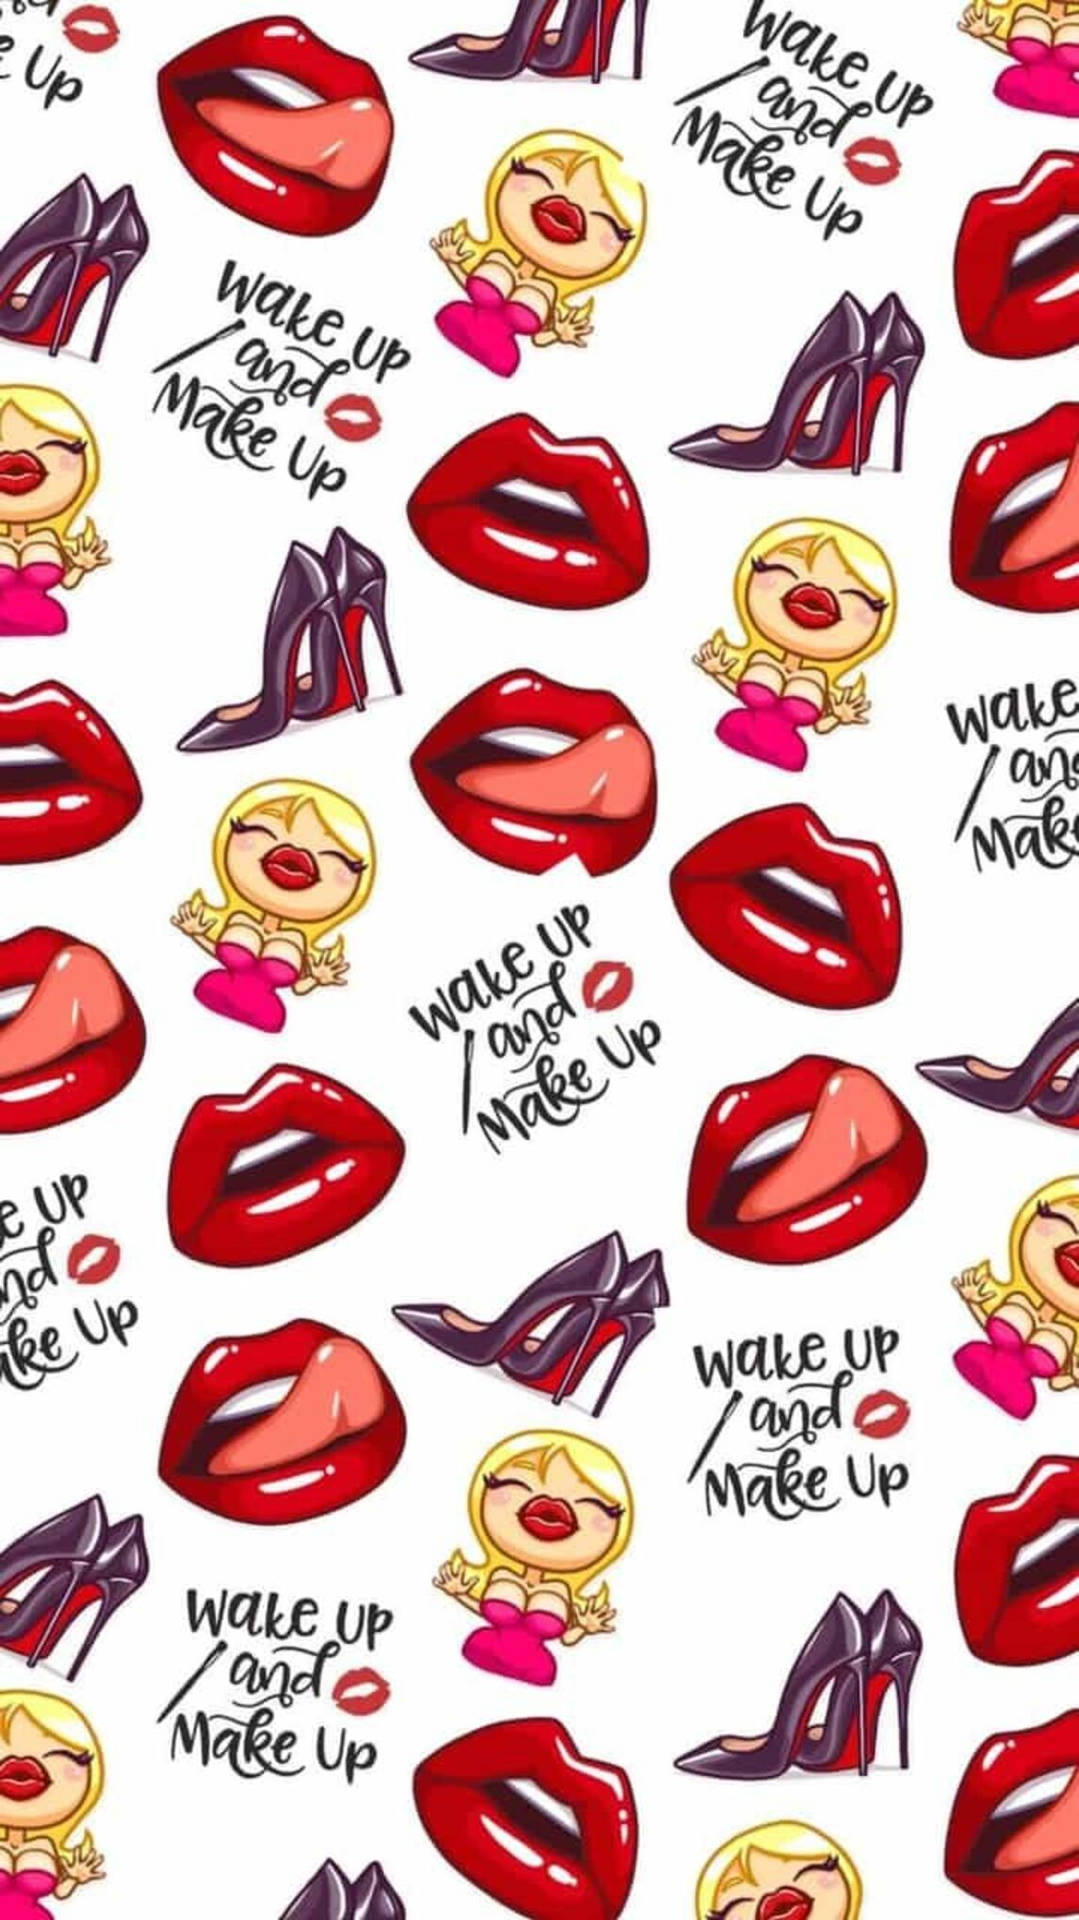 Red Lips Fashion Quote wallpaper.